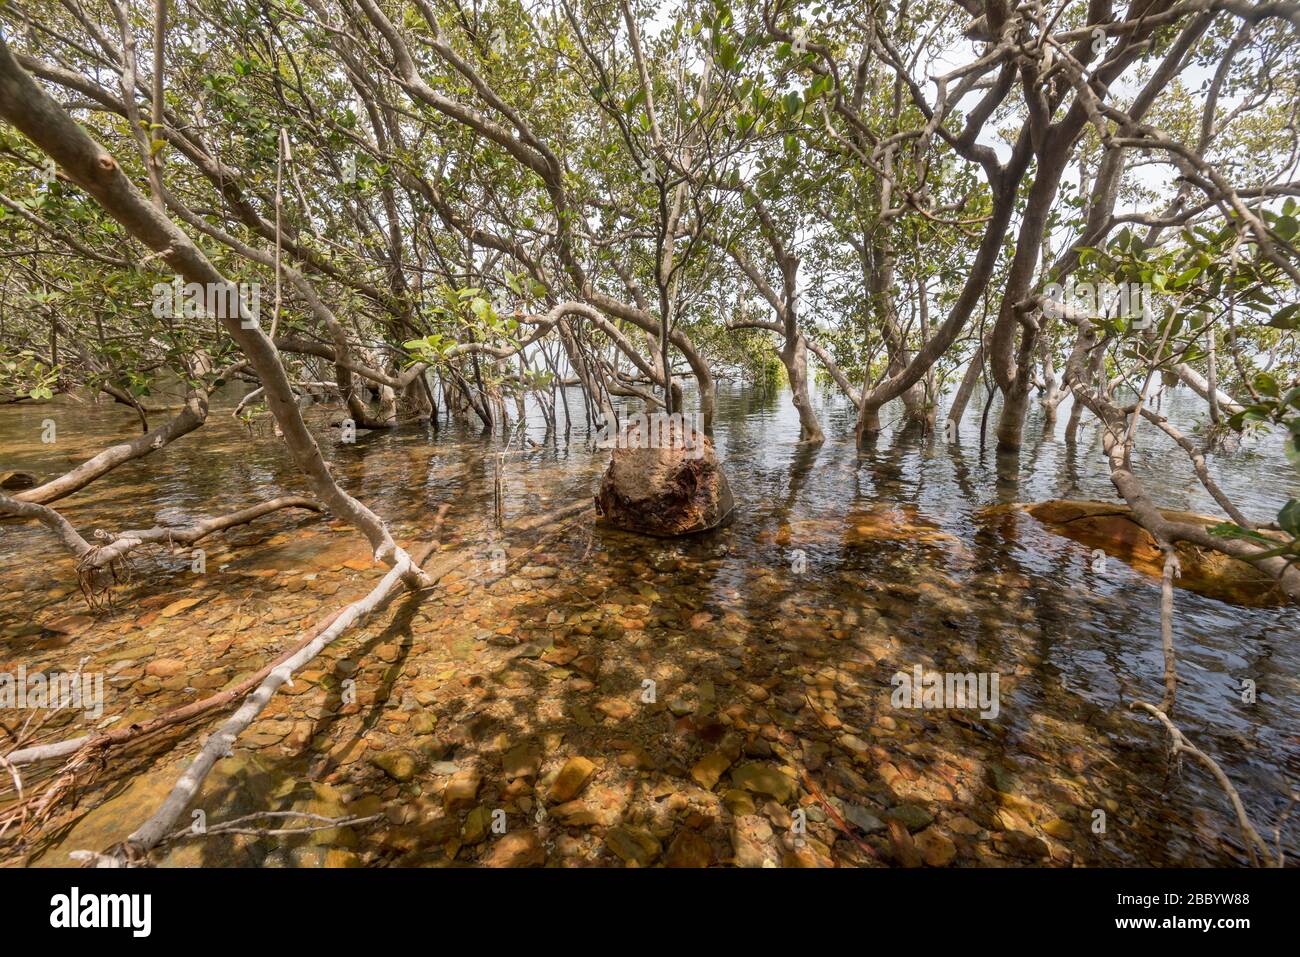 River Mangroves (Aegiceras corniculatum) submerged under an incoming tide on the banks of the Myall River near Tea Gardens, New South Wales, Australia Stock Photo